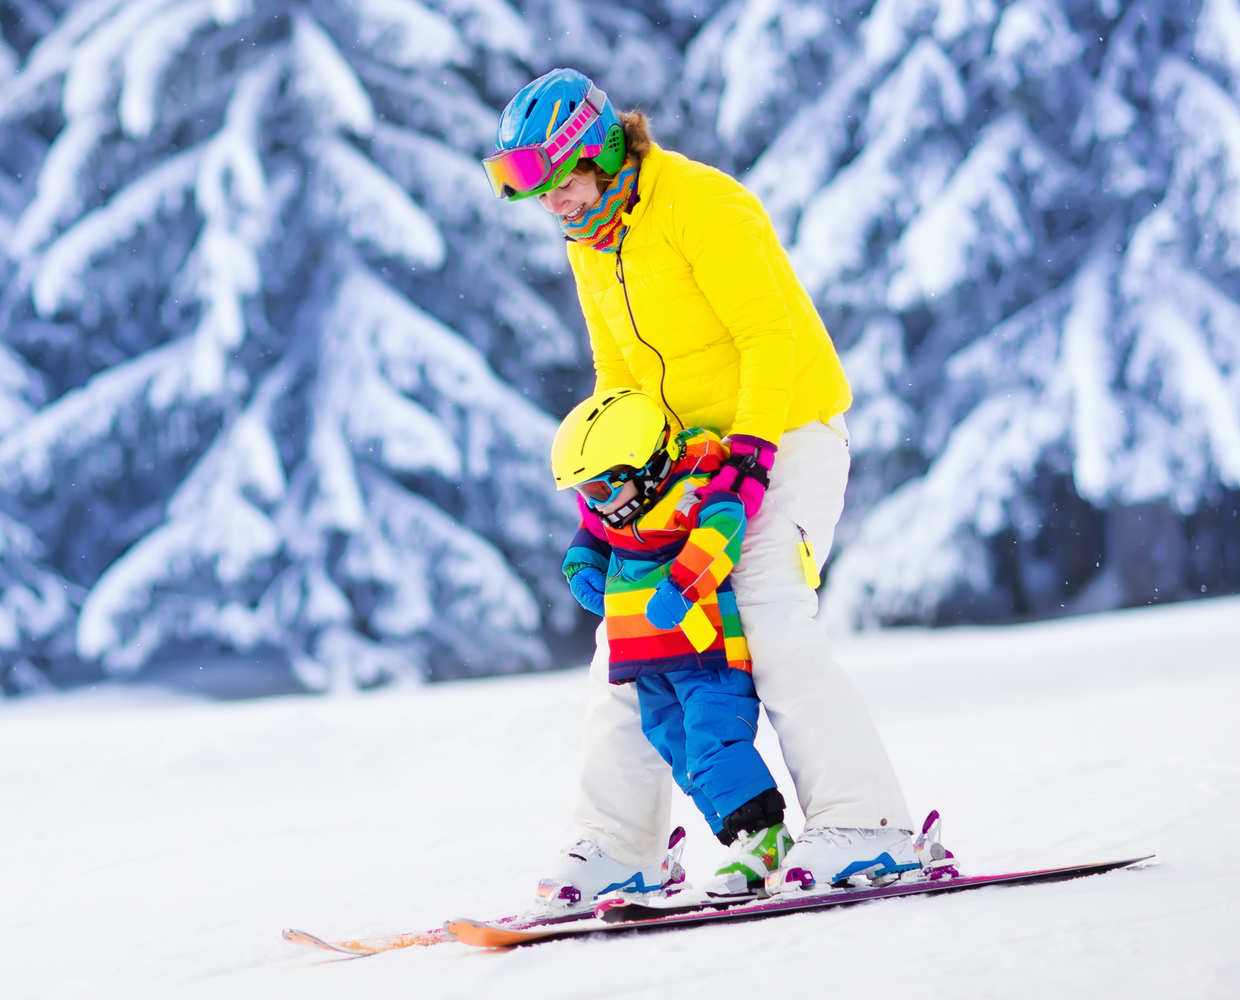 A mother and her young child relish the experience of skiing at Sunlight Mountain Resort, donned in vibrant ski gear rented from Hanging Lake Adventure Co-op. Their bright-colored attire makes them easily noticeable as they traverse the slopes.